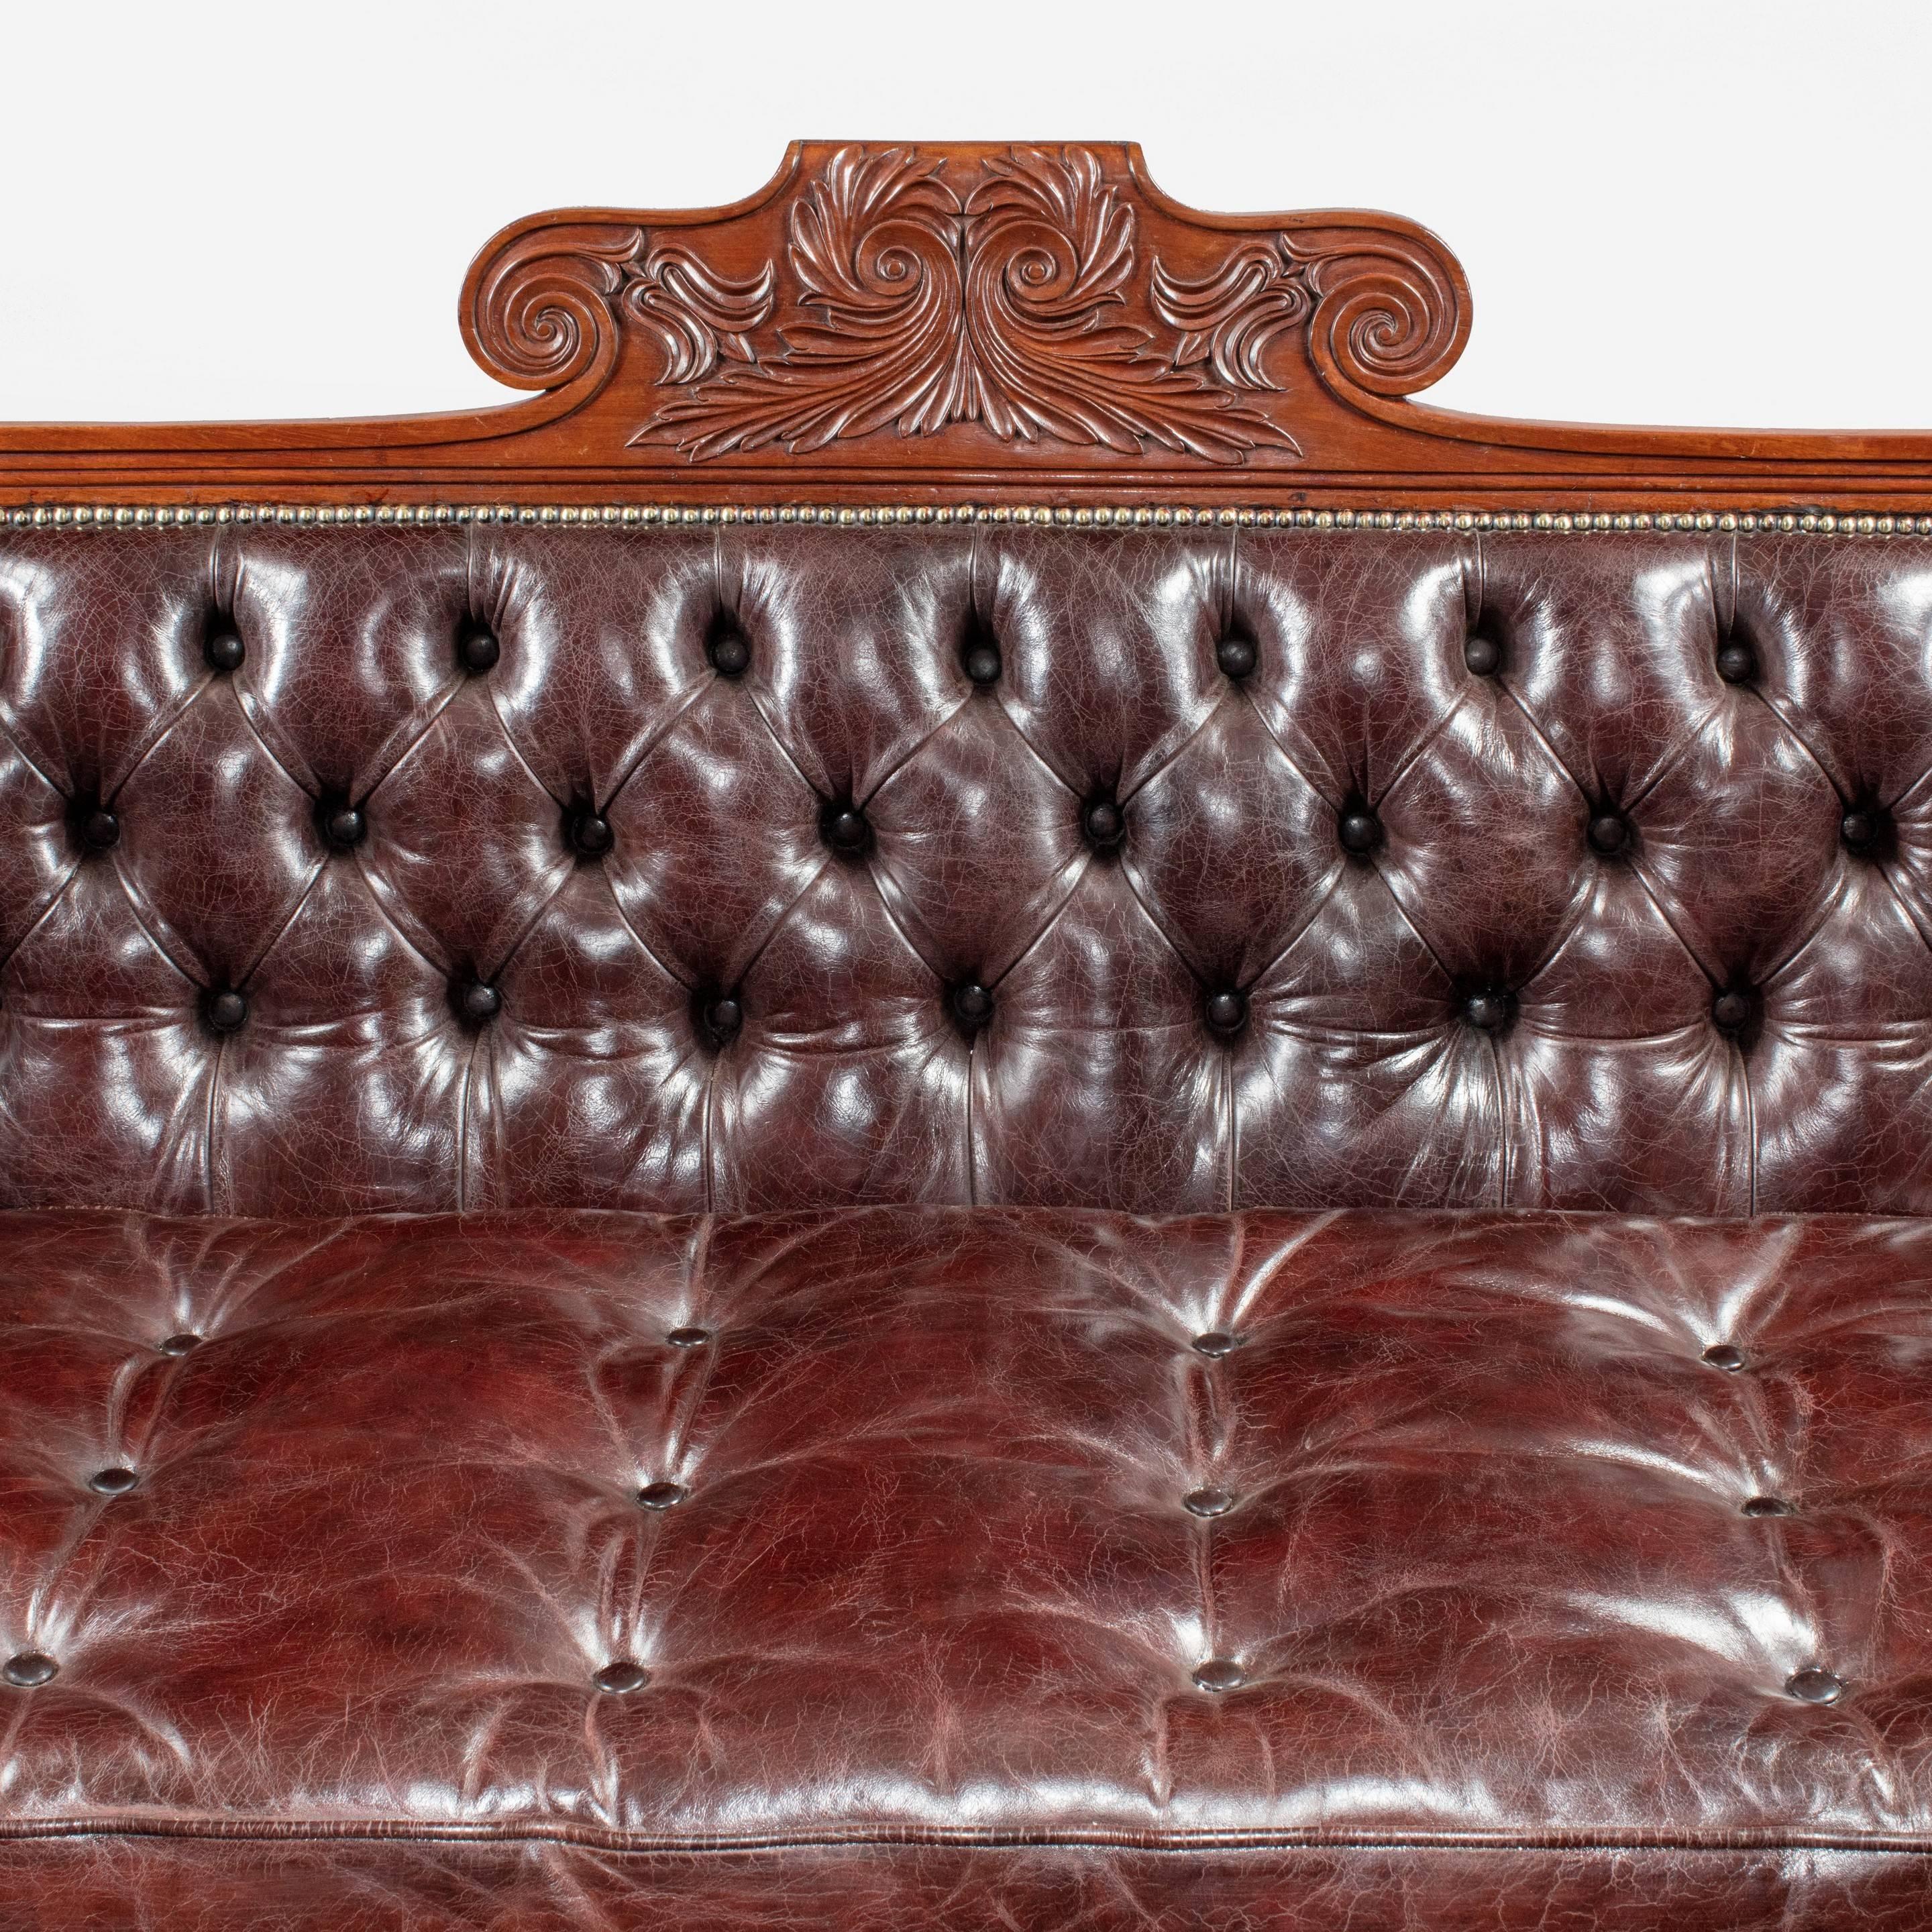 A late Regency mahogany sofa, boldly carved with roundels, the curved cresting centered on a scrolling motif and supported on lyre fronted legs with the original castors, re-upholstered in deep-buttoned burgundy leather.